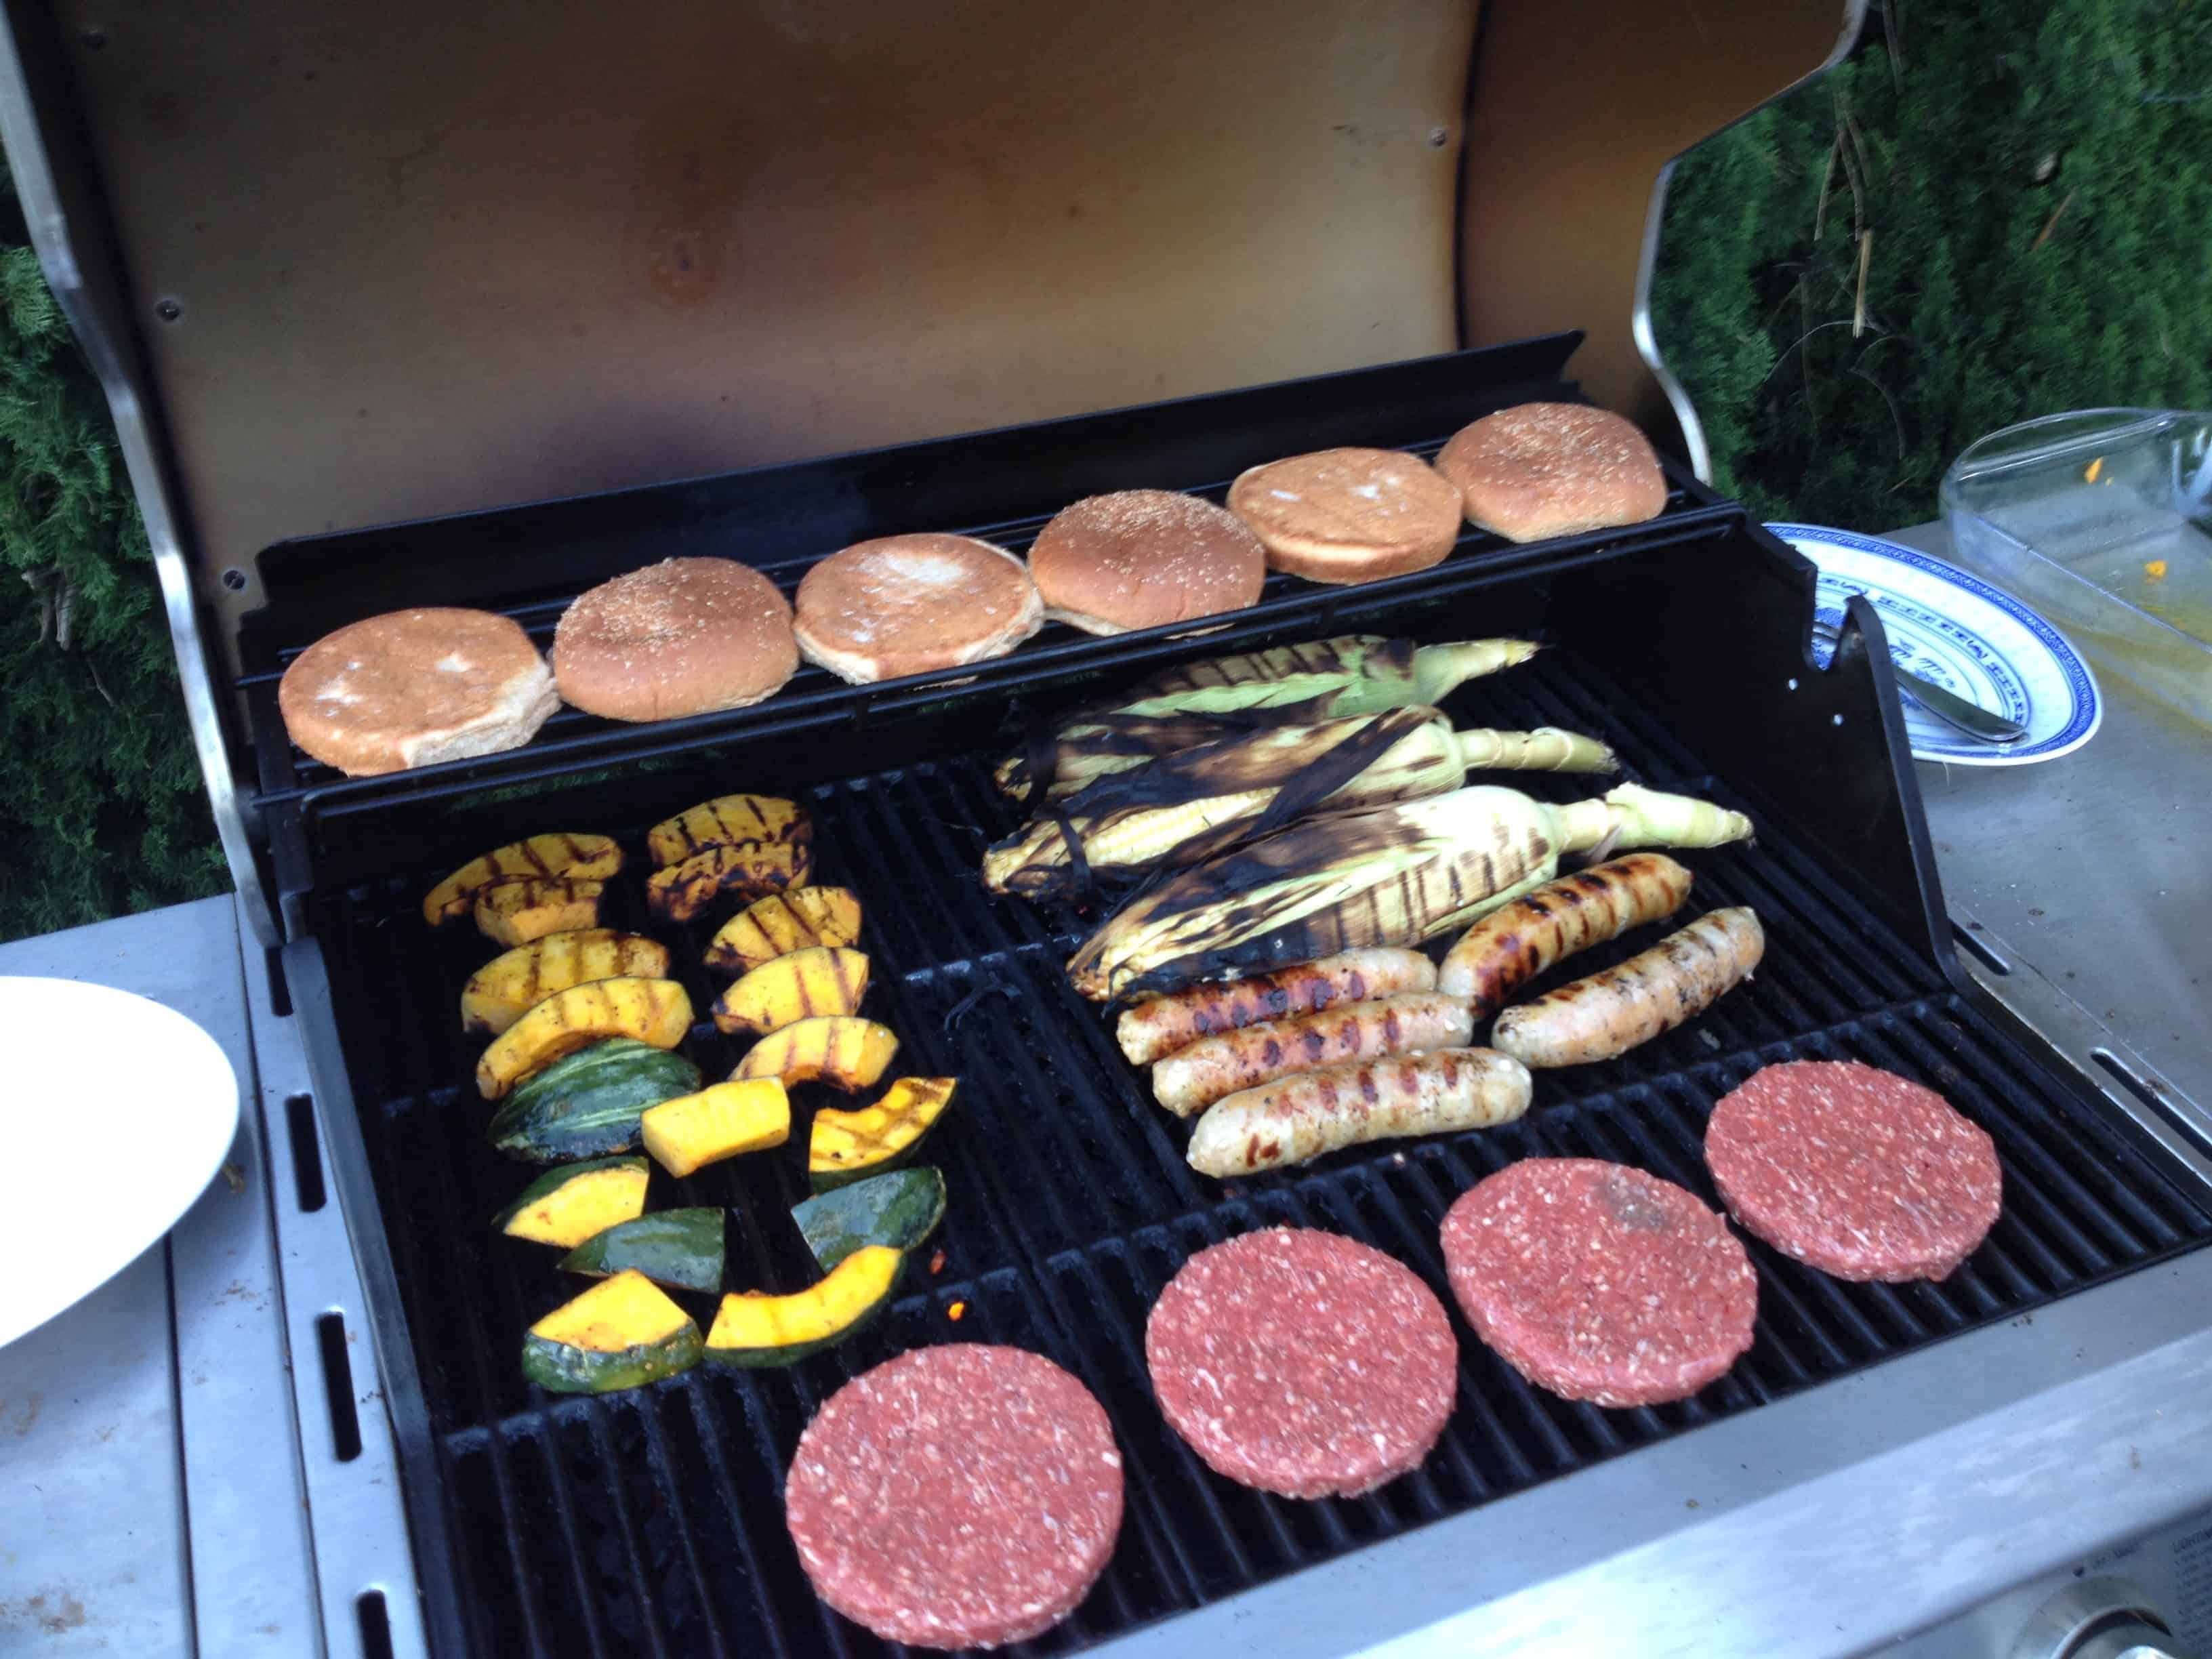 Prepare Varied Foods on a Grill